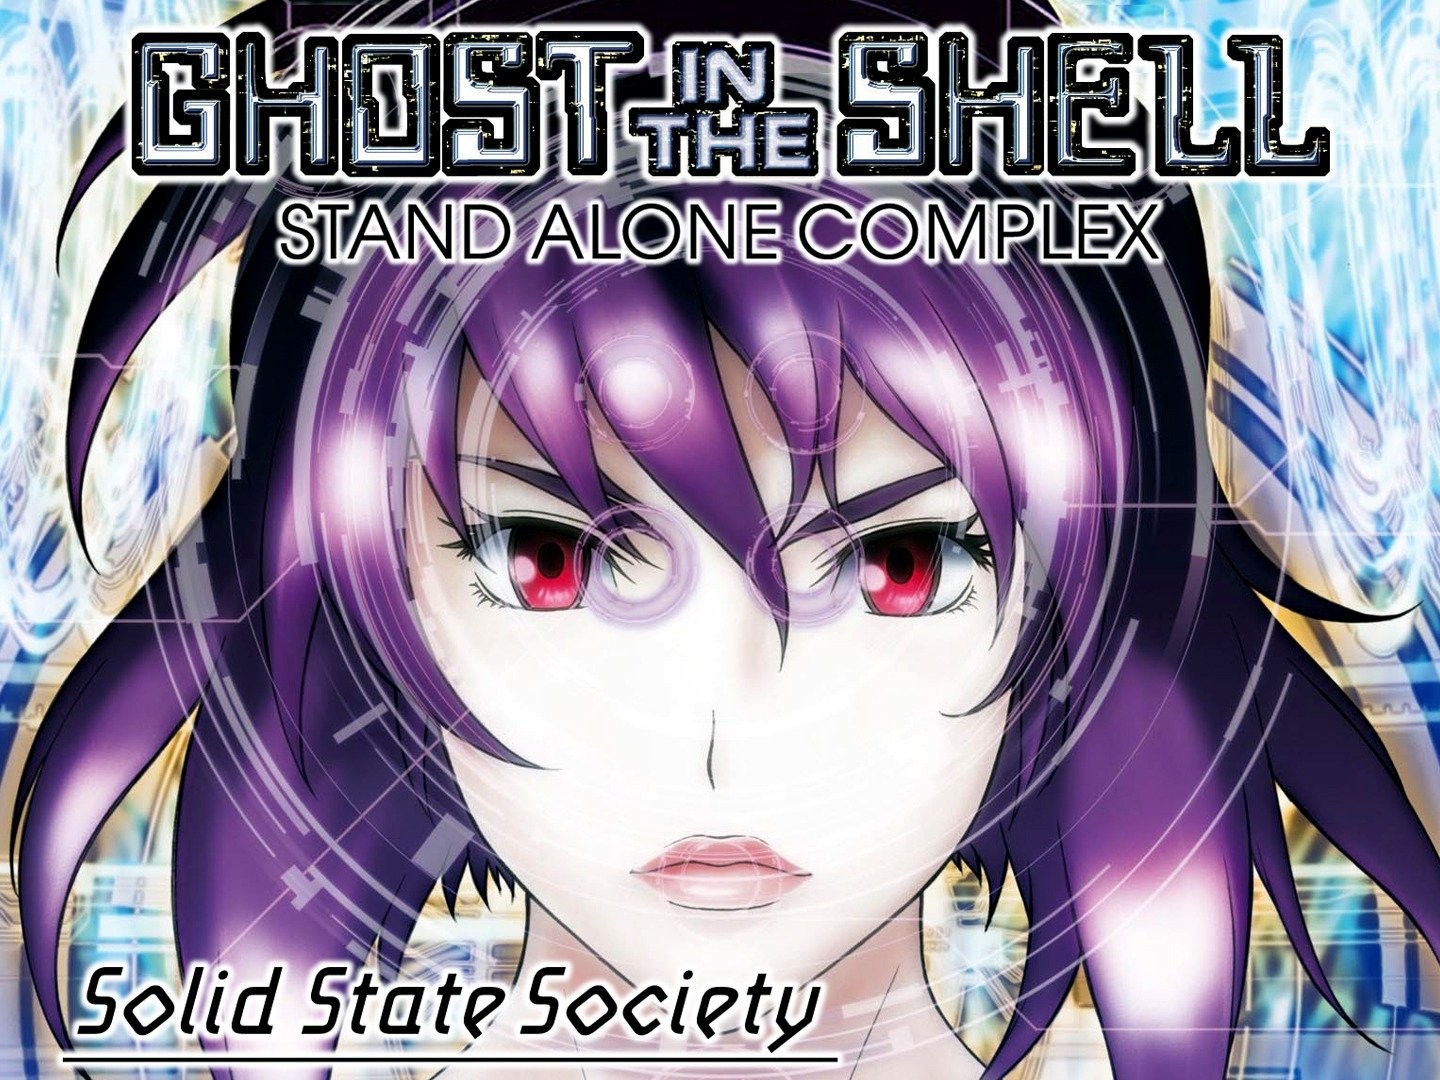 ghost-in-the-shell-stand-alone-complex-solid-state-society